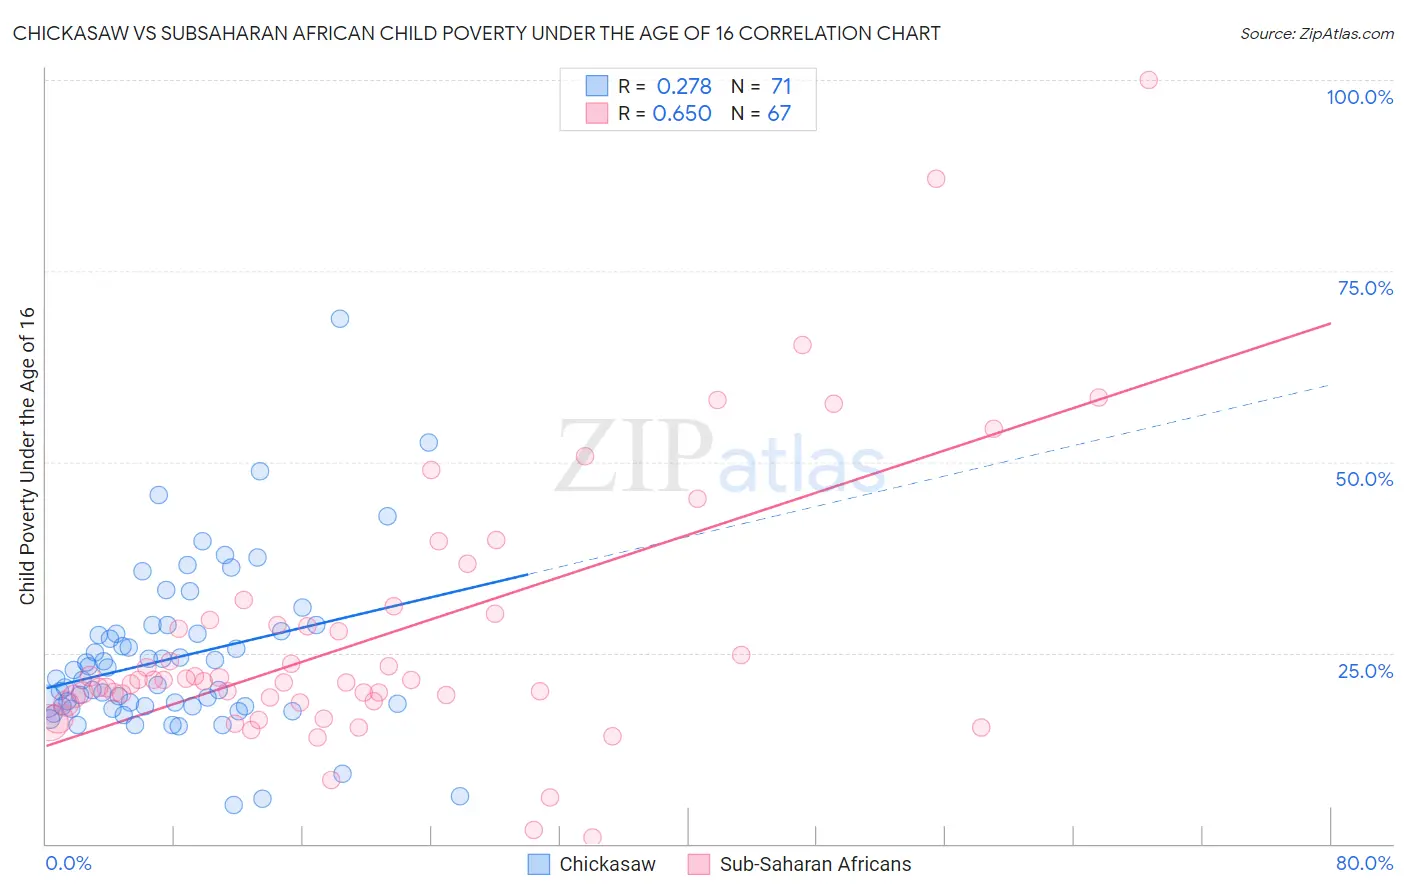 Chickasaw vs Subsaharan African Child Poverty Under the Age of 16